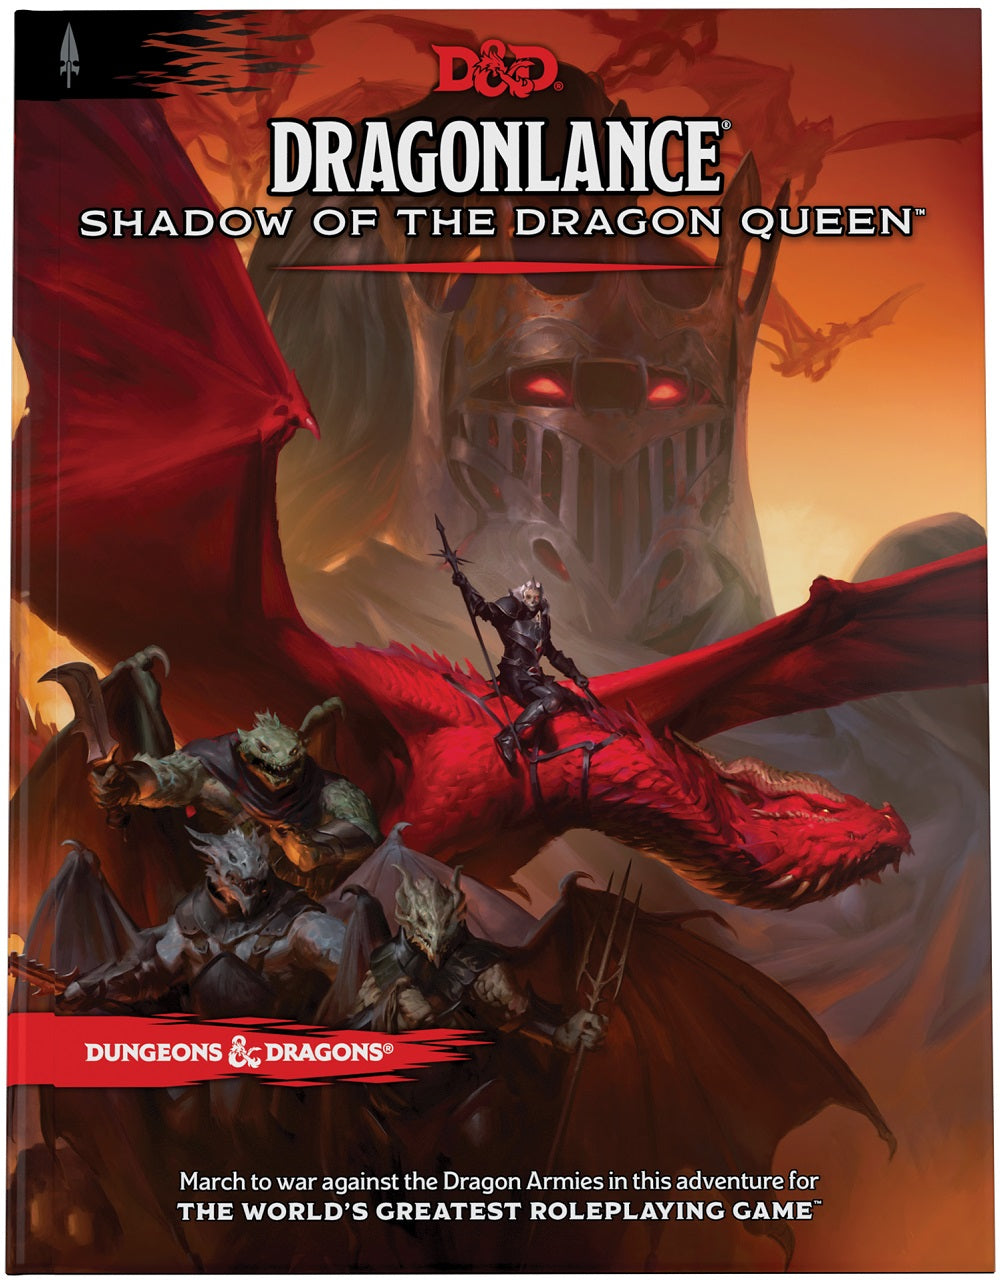 Dragonlance - Shadow of the Dragon Queen